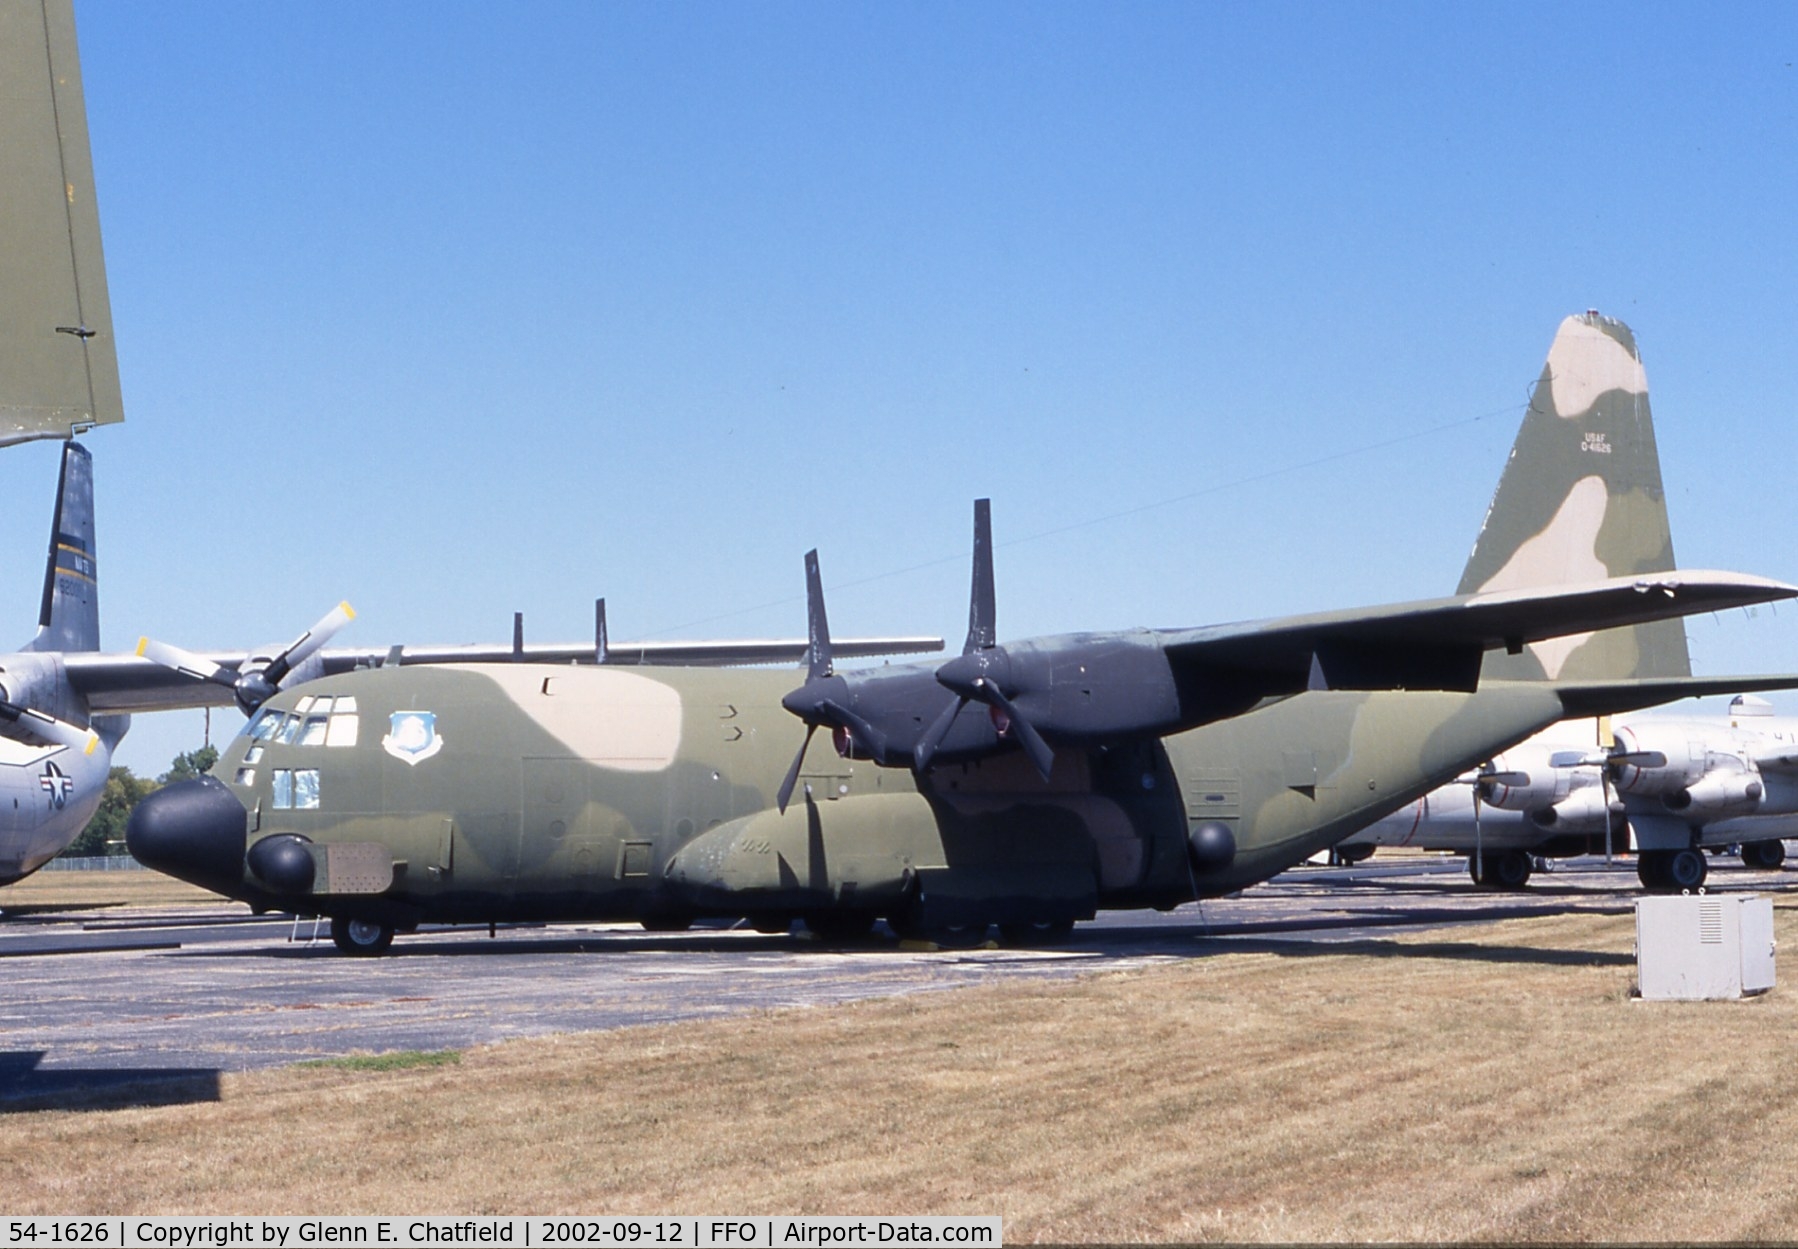 54-1626, 1954 Lockheed AC-130A-LM Hercules C/N 182-3013, AC-130A at the National Museum of the U.S. Air Force